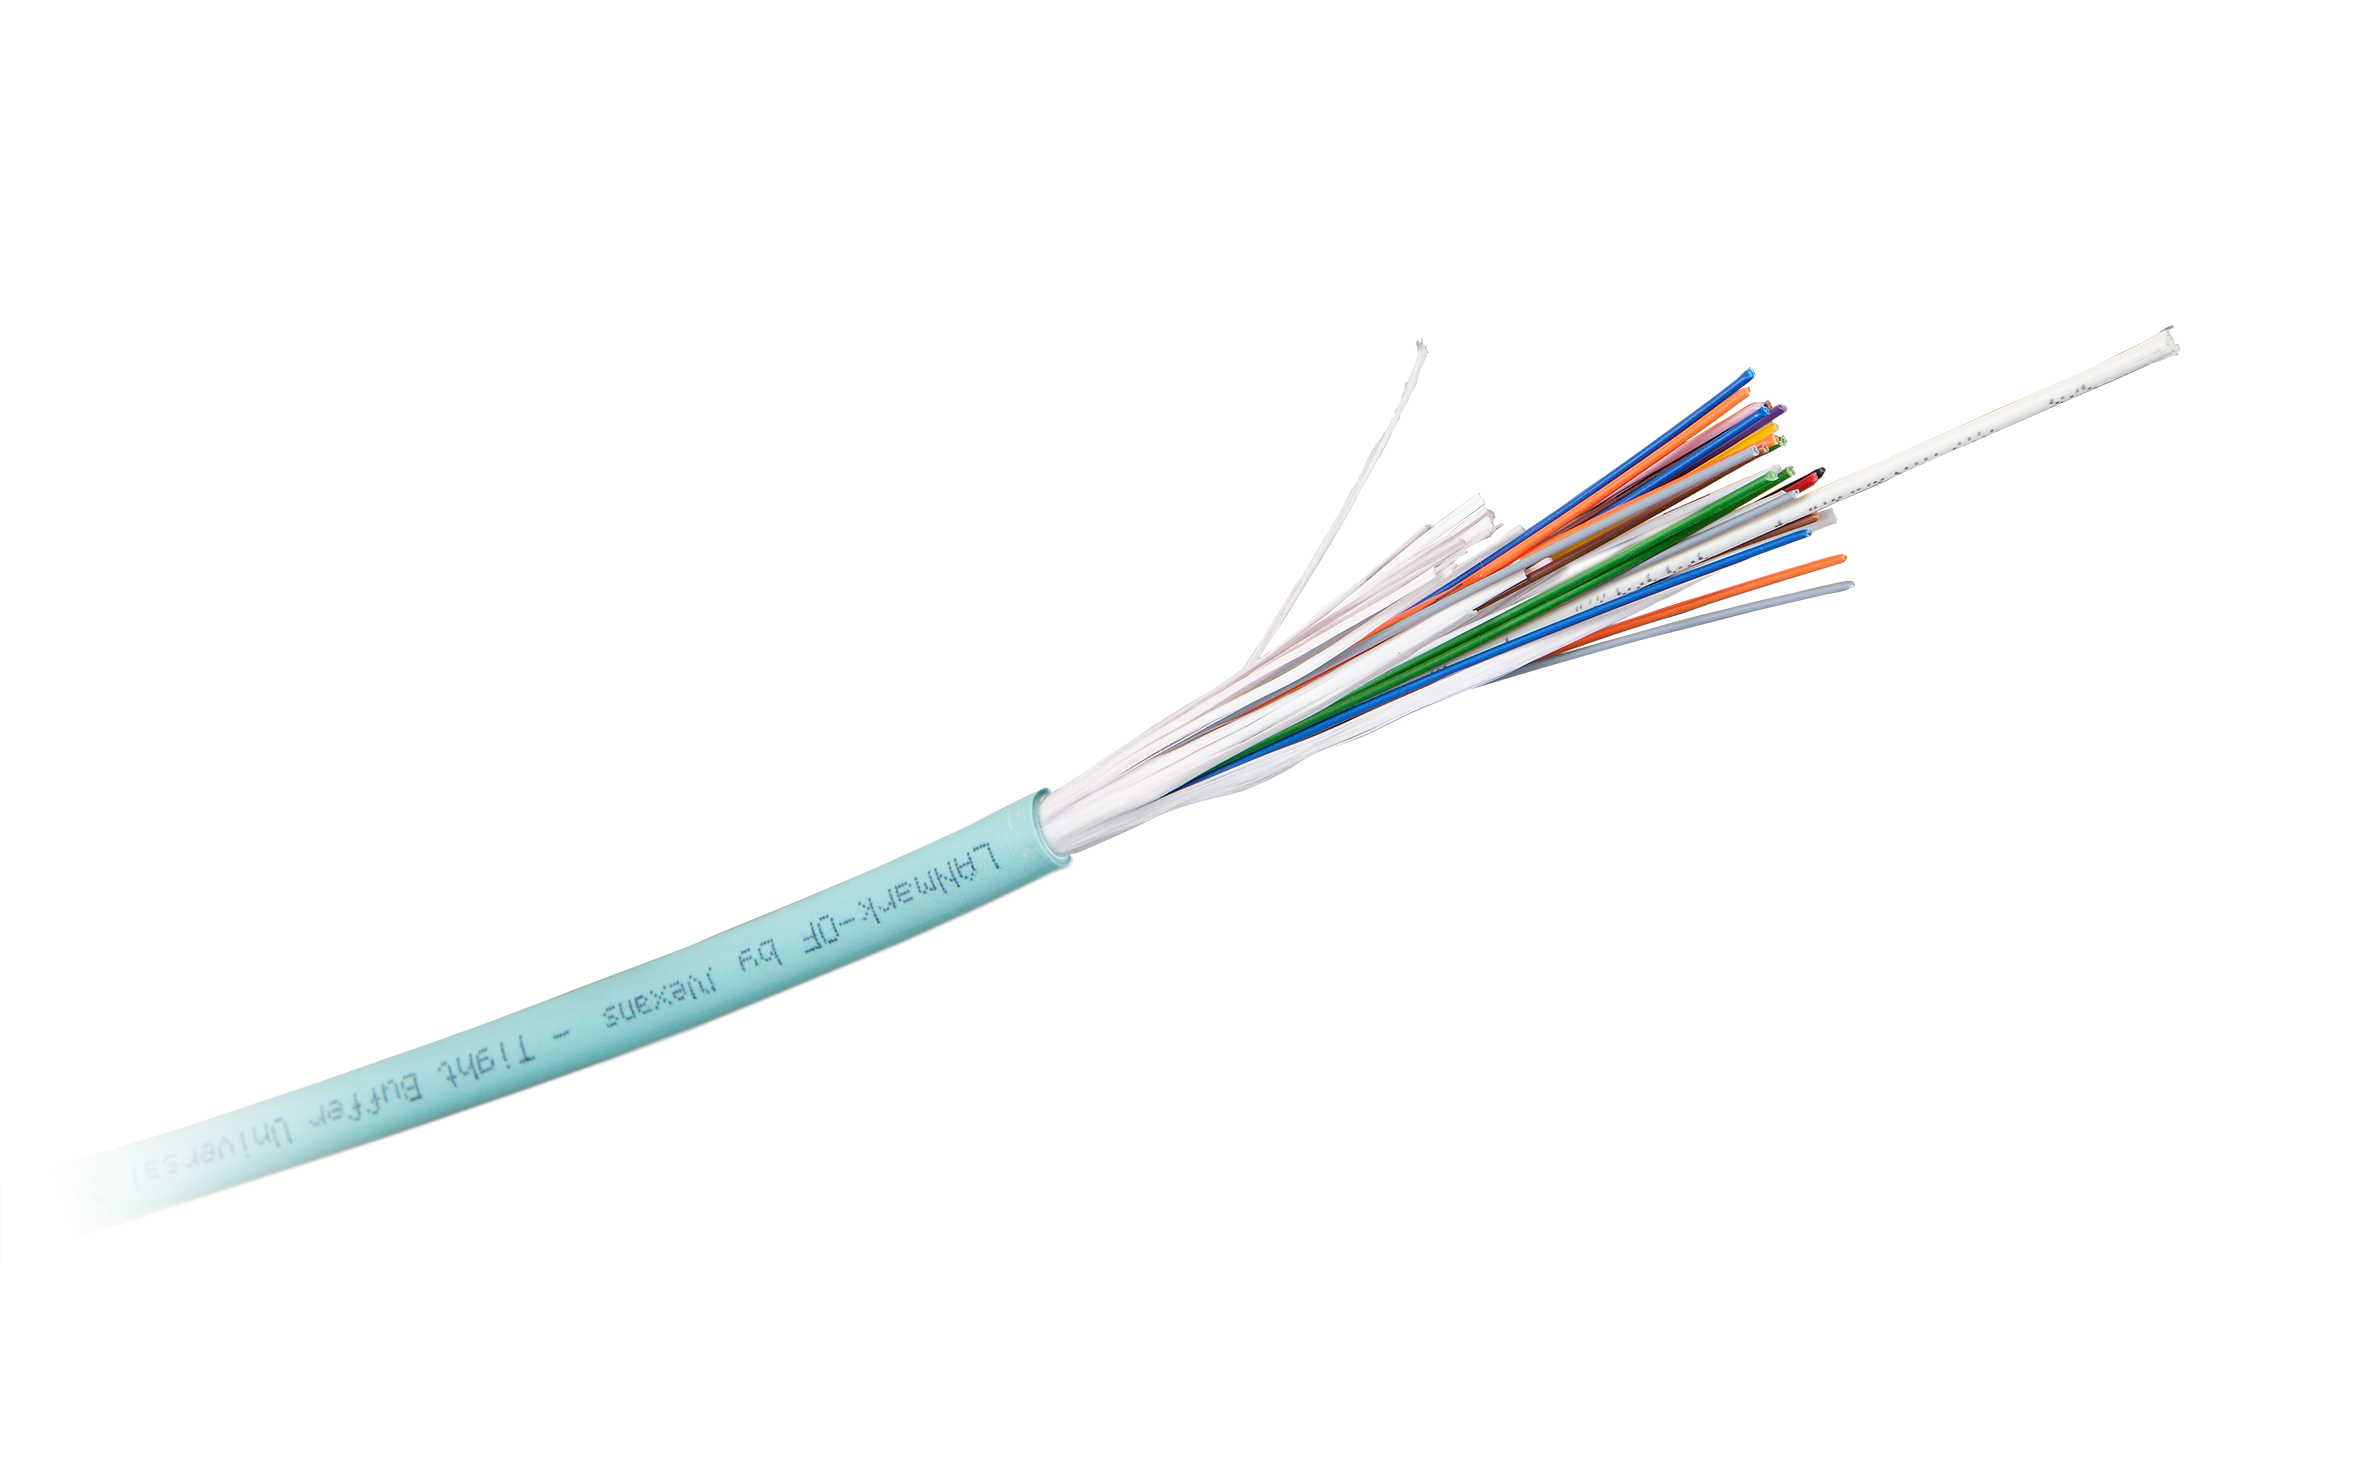 Nexans introduces tight universal cables